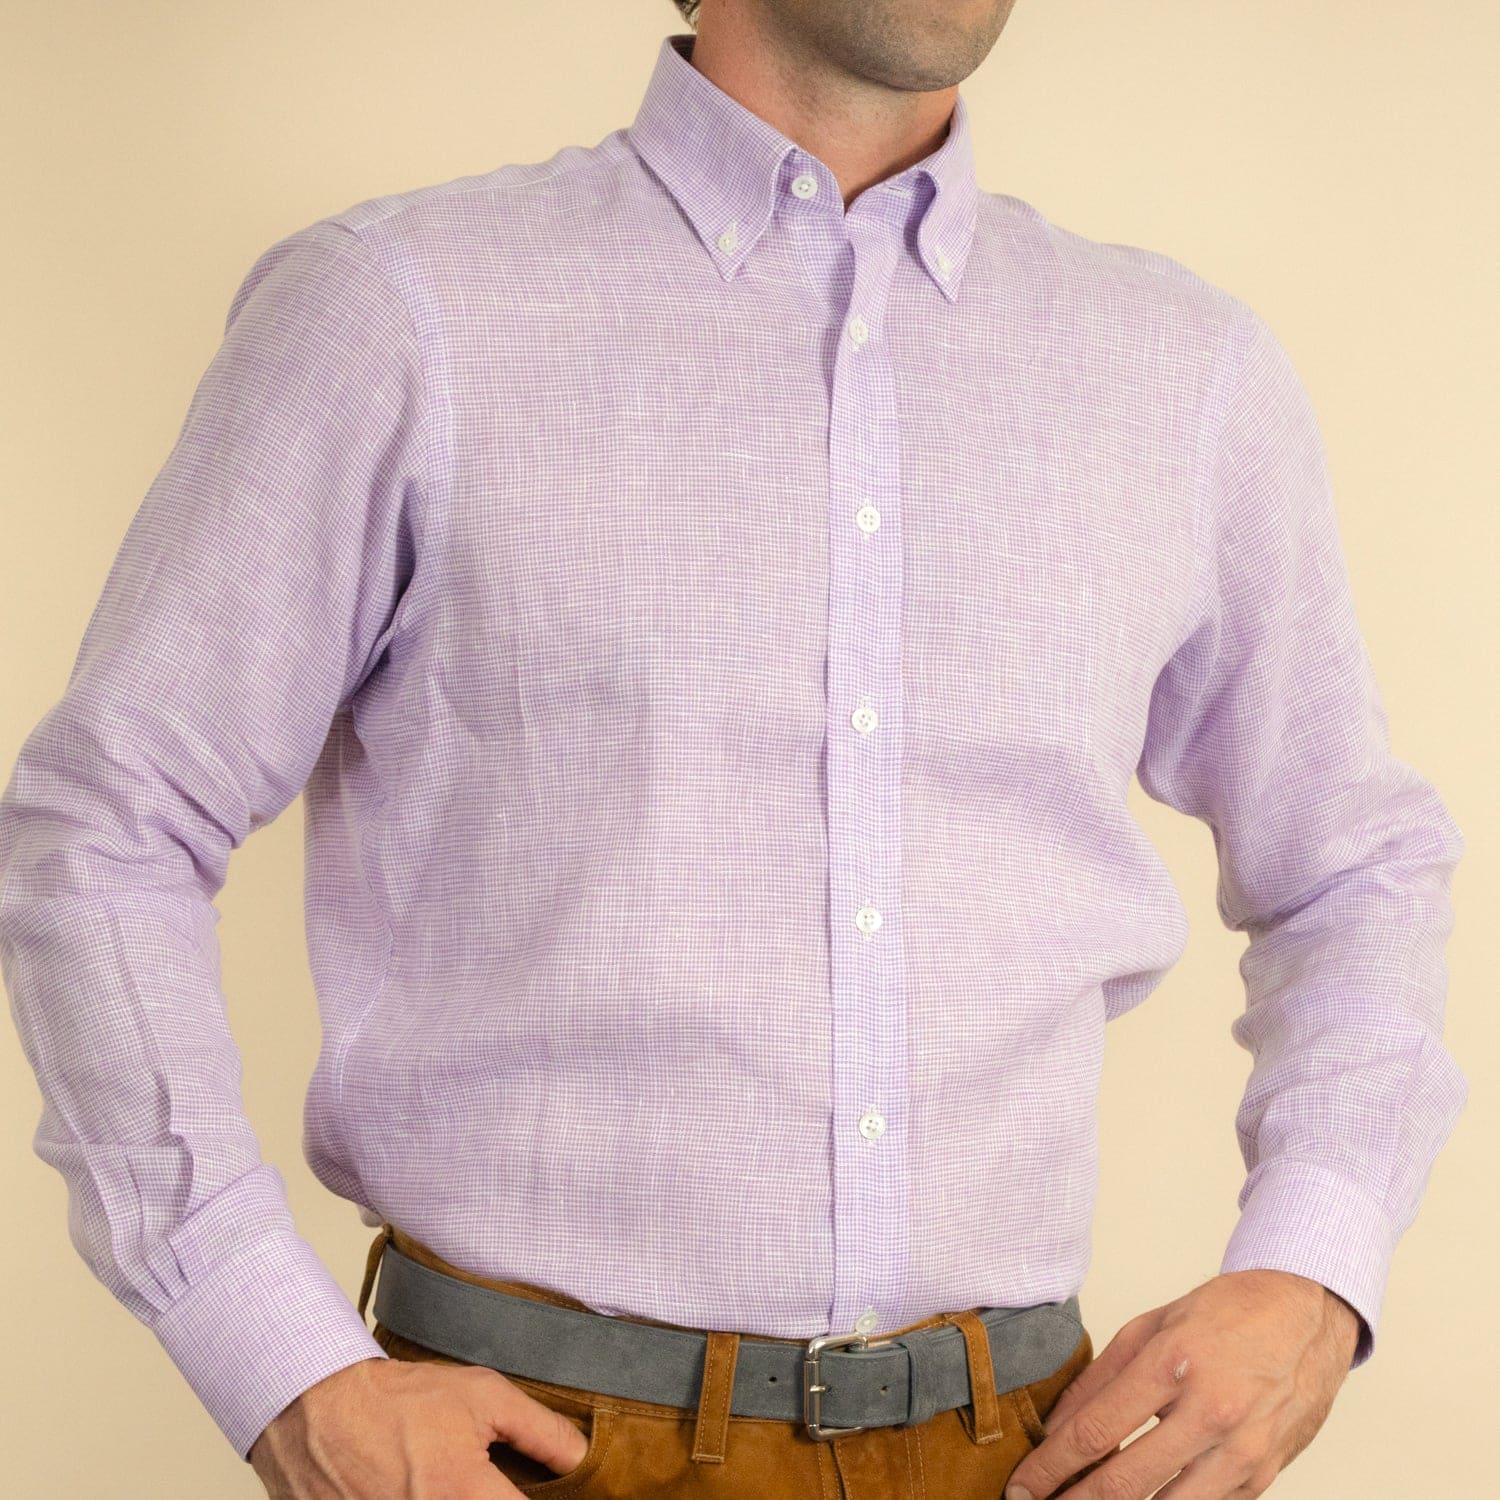 Contemporary Fit, Button Down Collar, 2 Button Cuff Shirt in Plain Lilac Houndstooth Linen